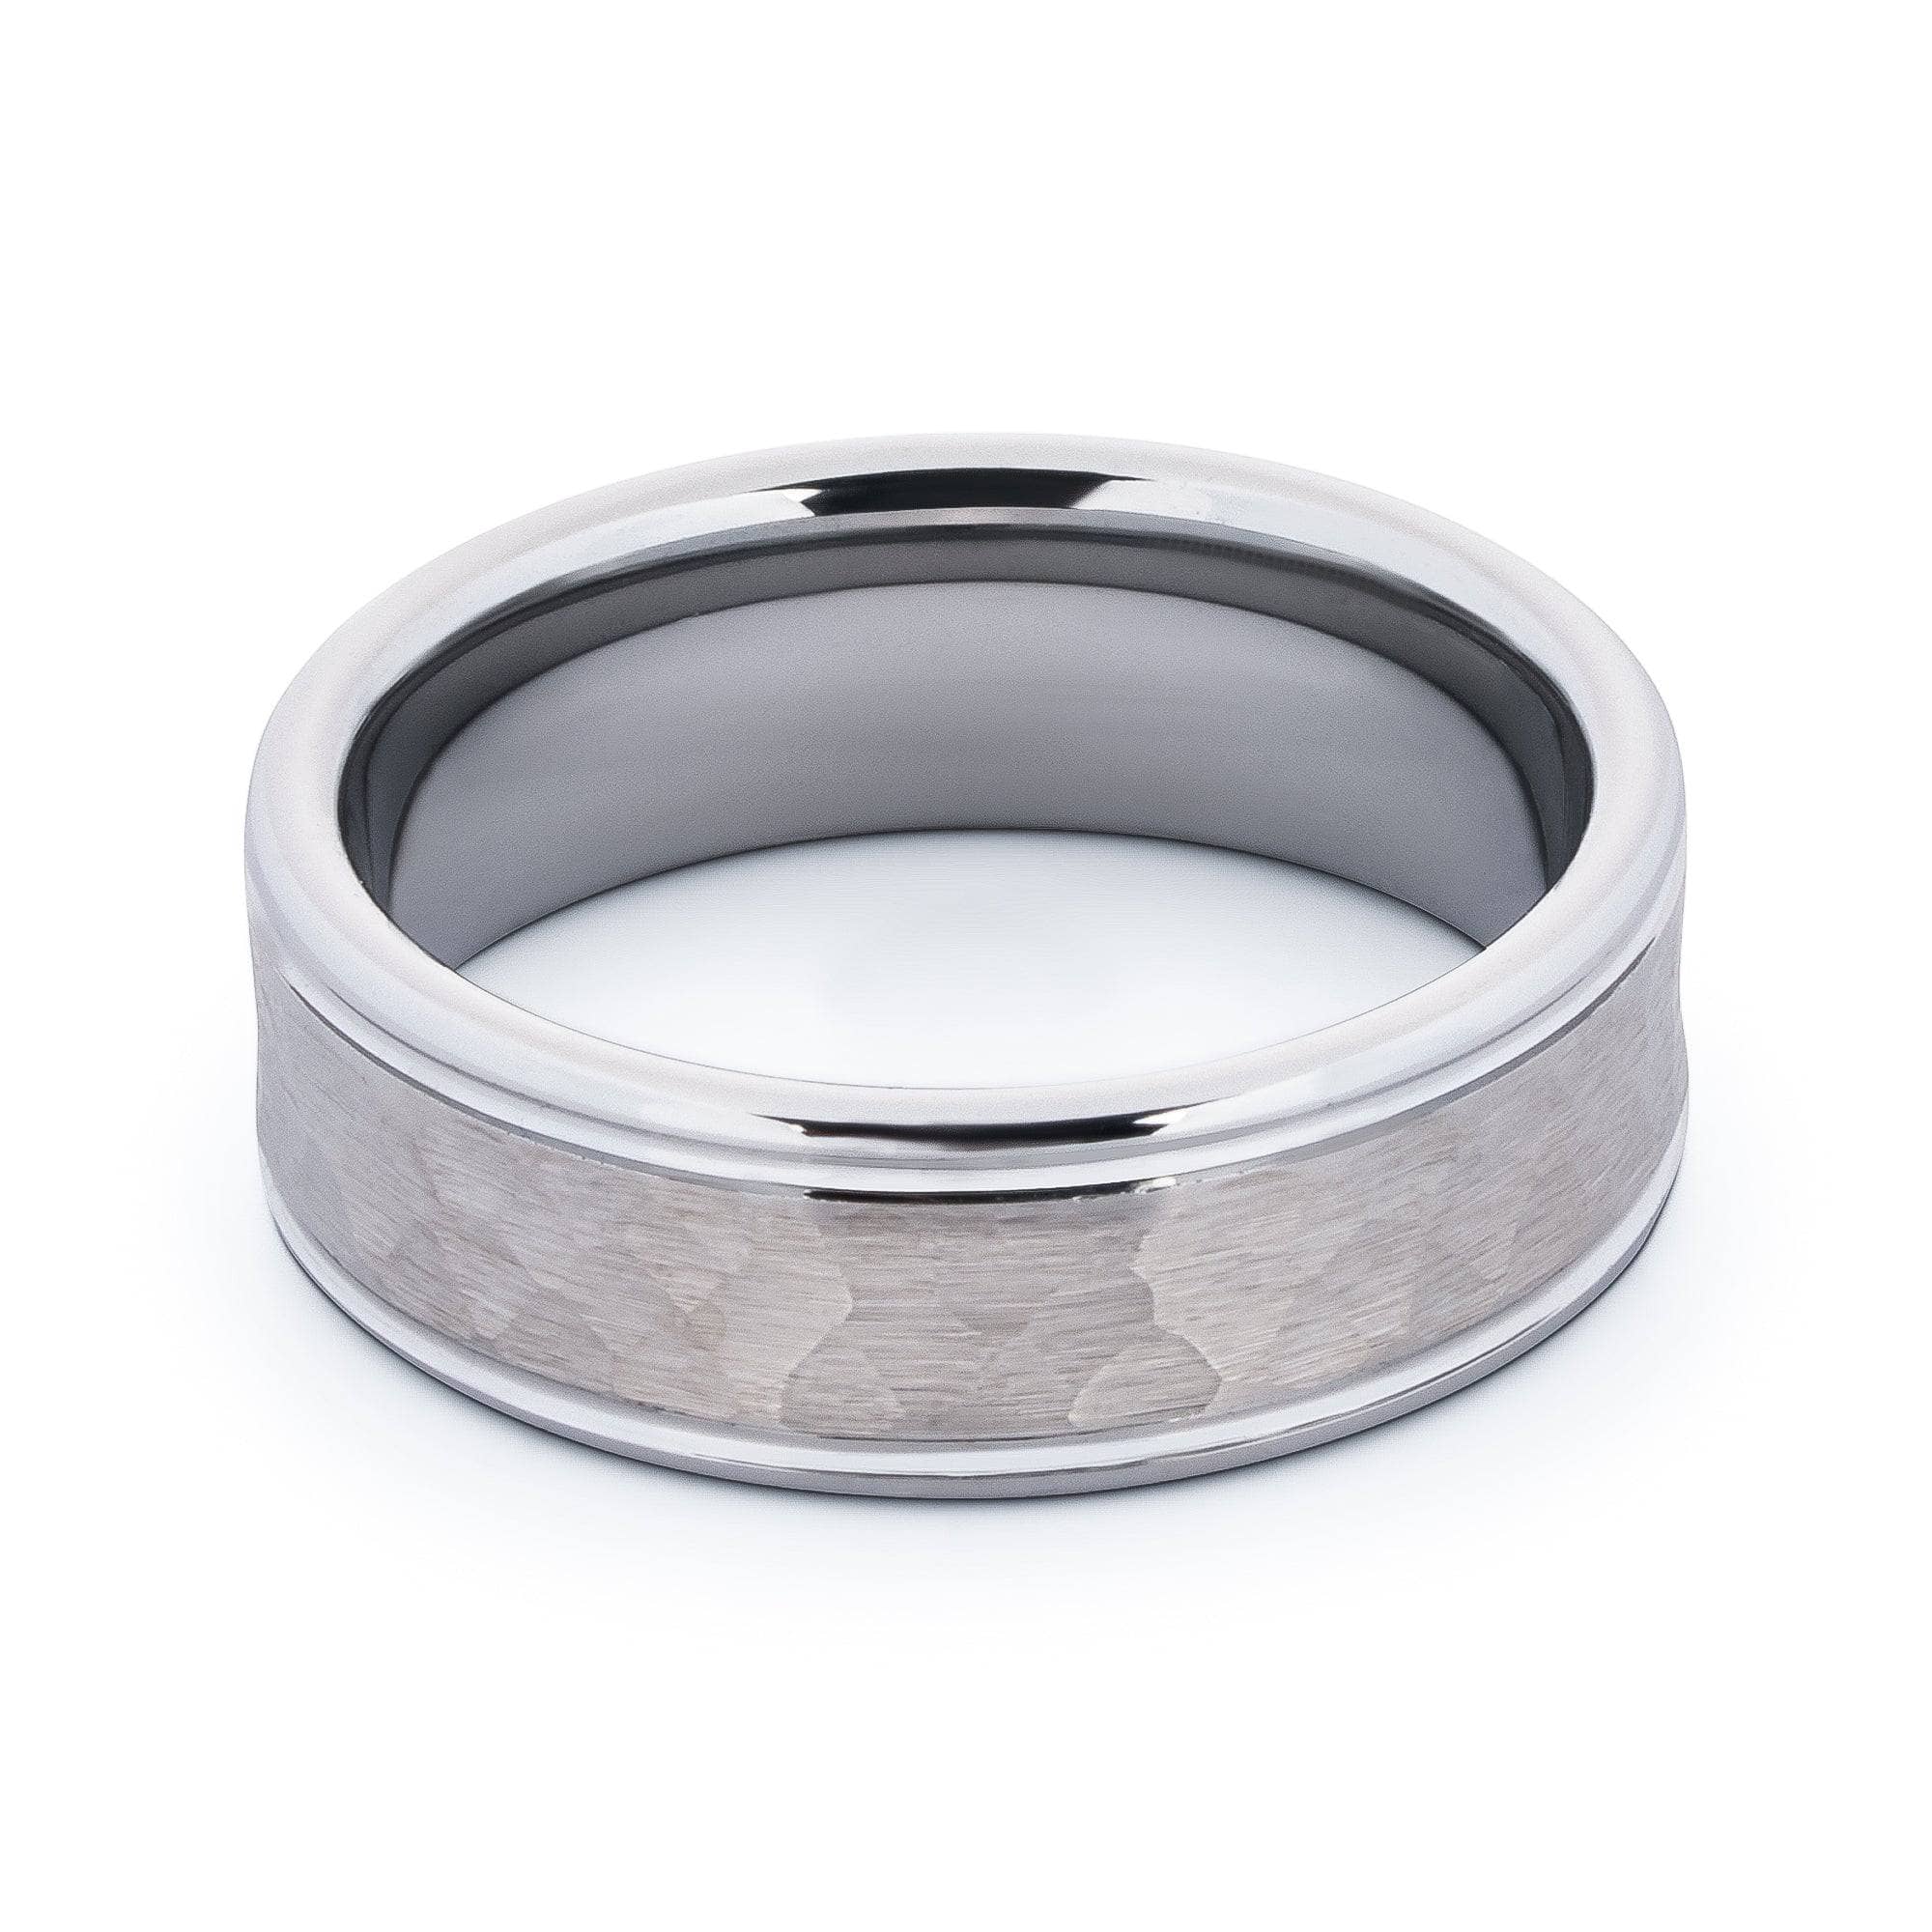 Polished Tungsten Wedding Band With Raised Hammered Inlay